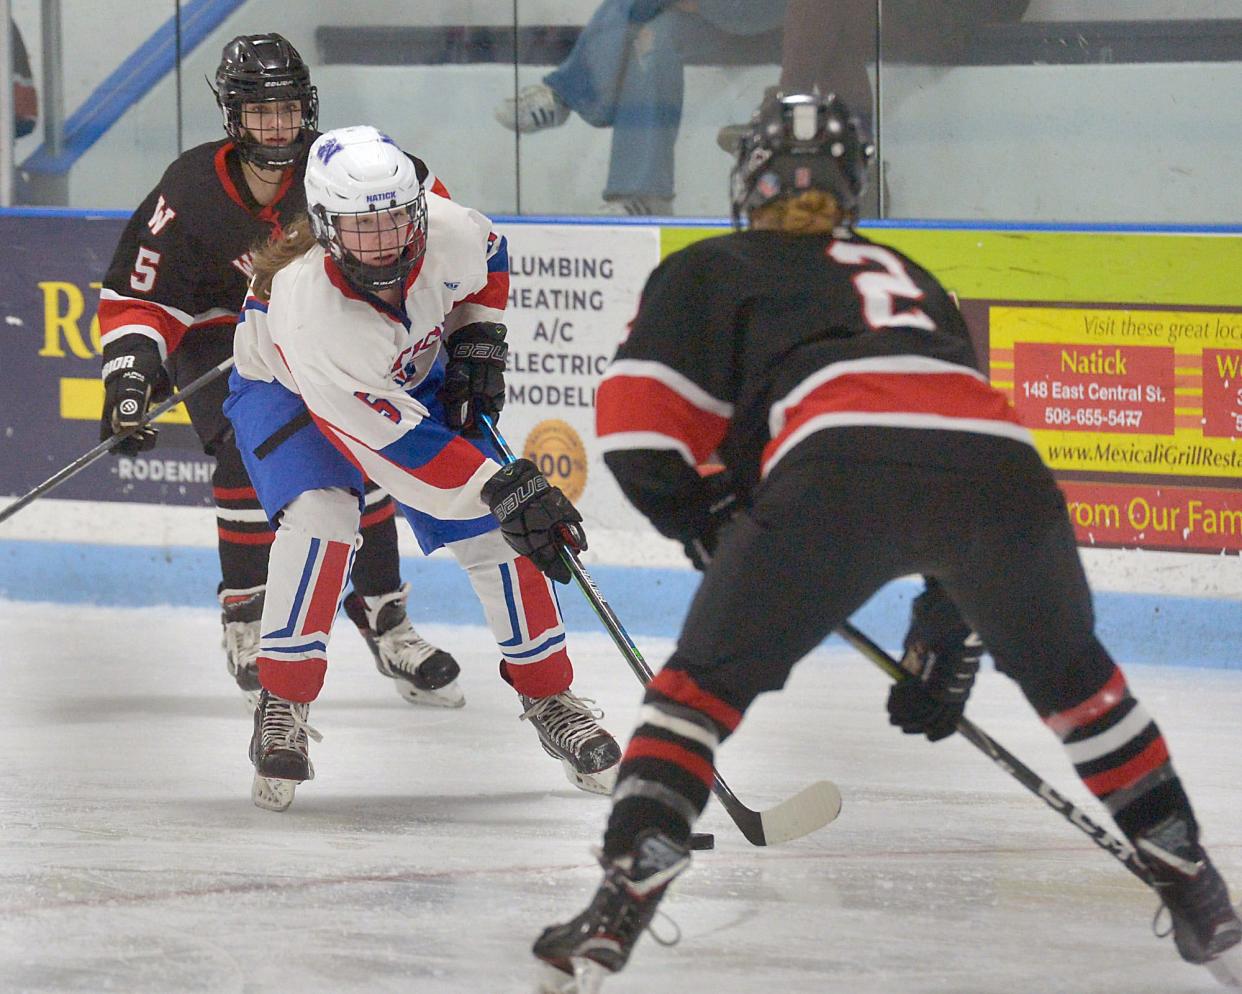 Natick High School freshman Maggie Connors makes a move against Wellesley at Chase Arena, Feb. 16, 2022.